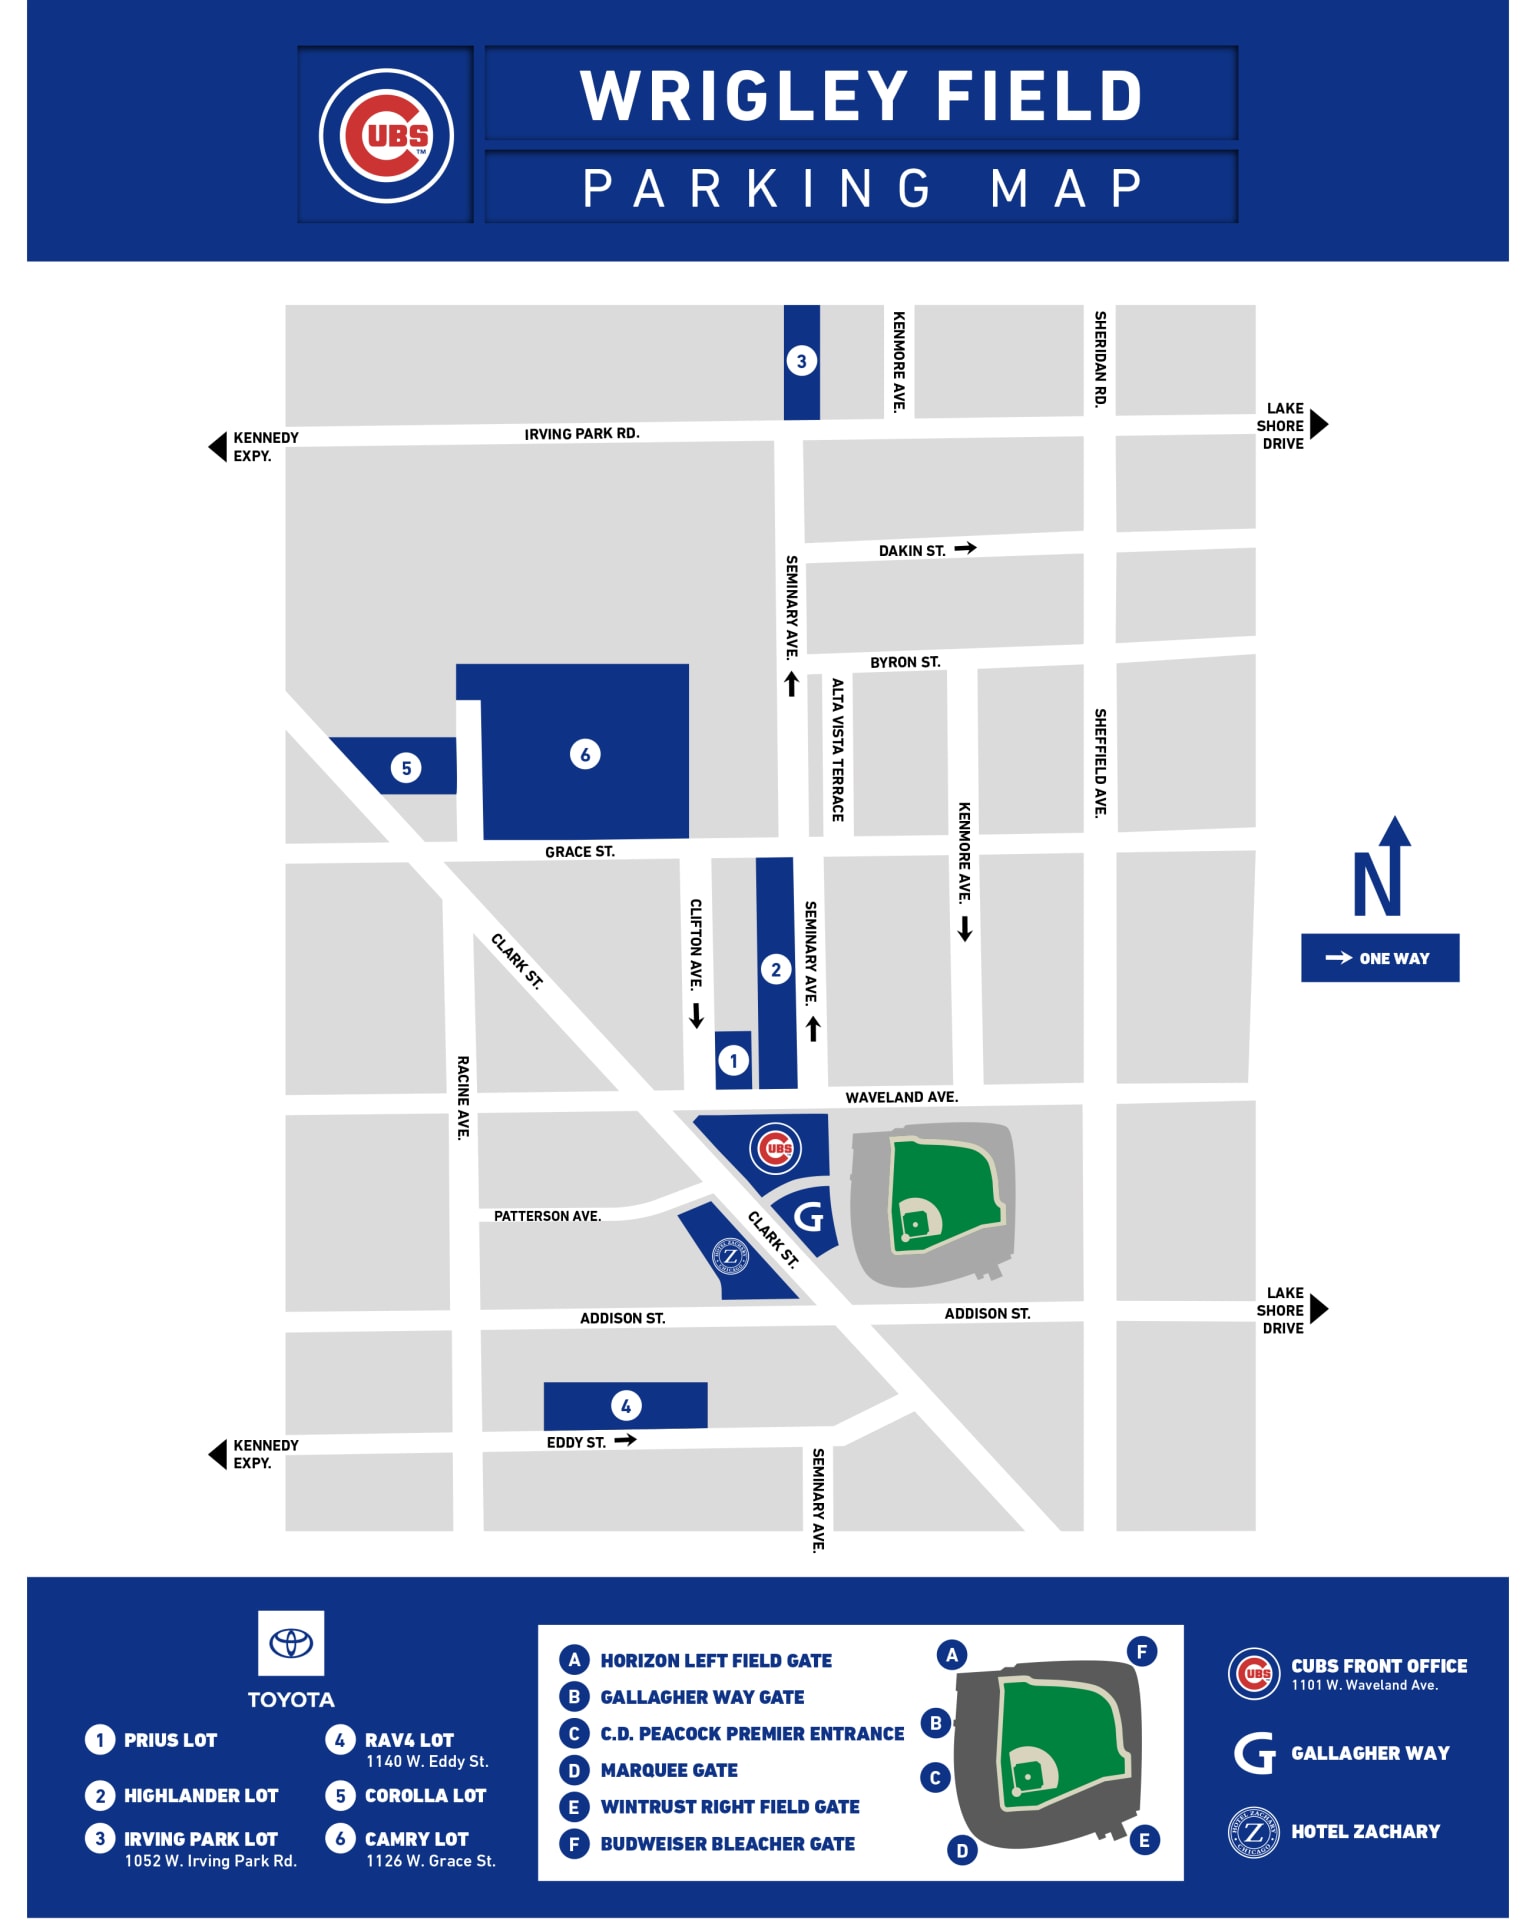 The Cubs Store - Wrigleyville - 5 tips